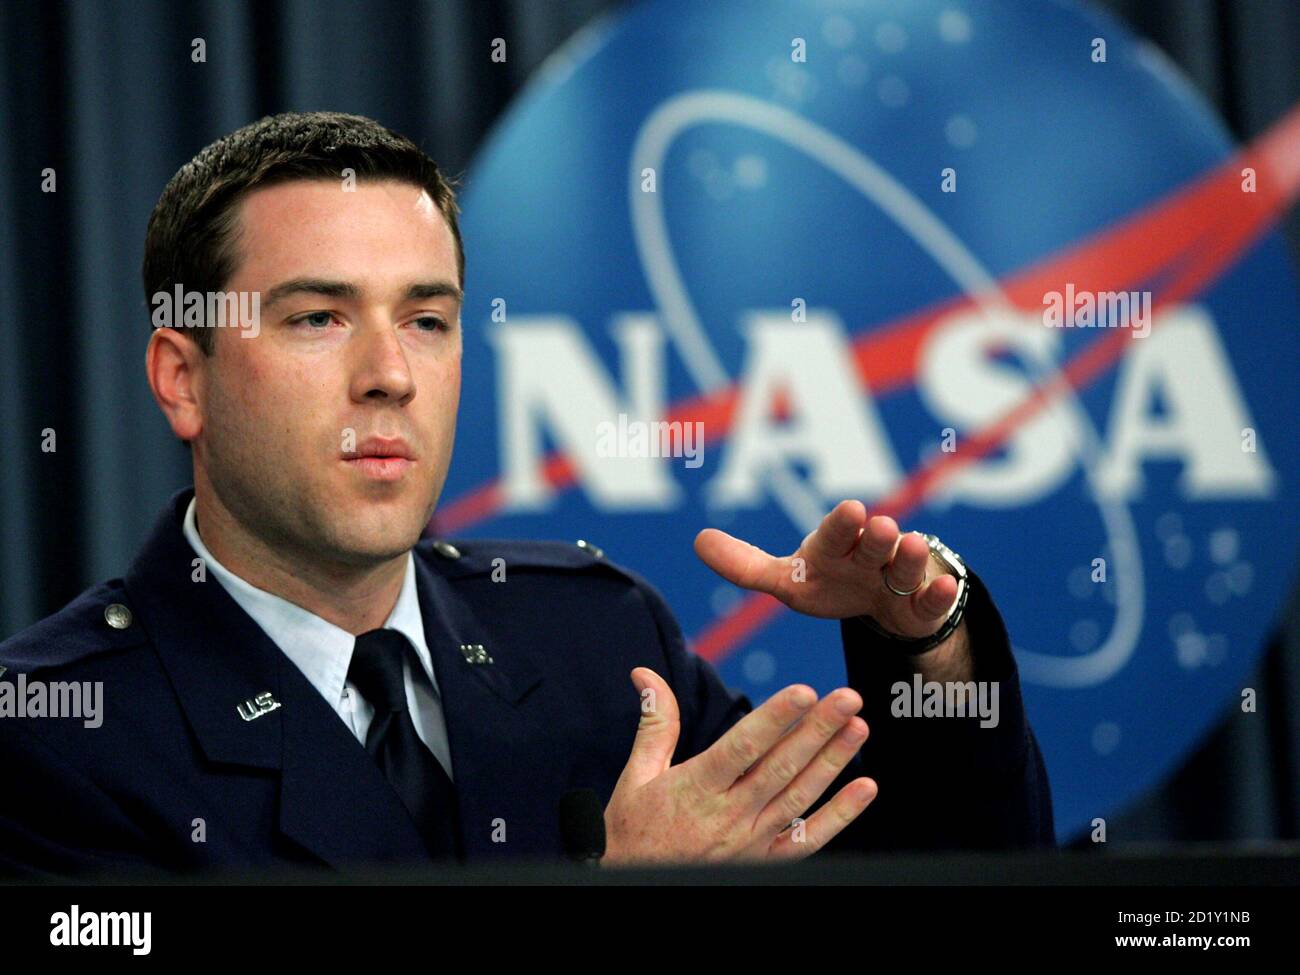 U.S. Air Force 1st Lt. Kaleb Nordgren of the 4th Weather Squadron speaks at the Kennedy Space Center in Cape Canaveral, Florida September 7, 2006. NASA has decided to launch the space shuttle Atlantis on September 8.  REUTERS/Rick Fowler  (UNITED STATES) Stock Photo